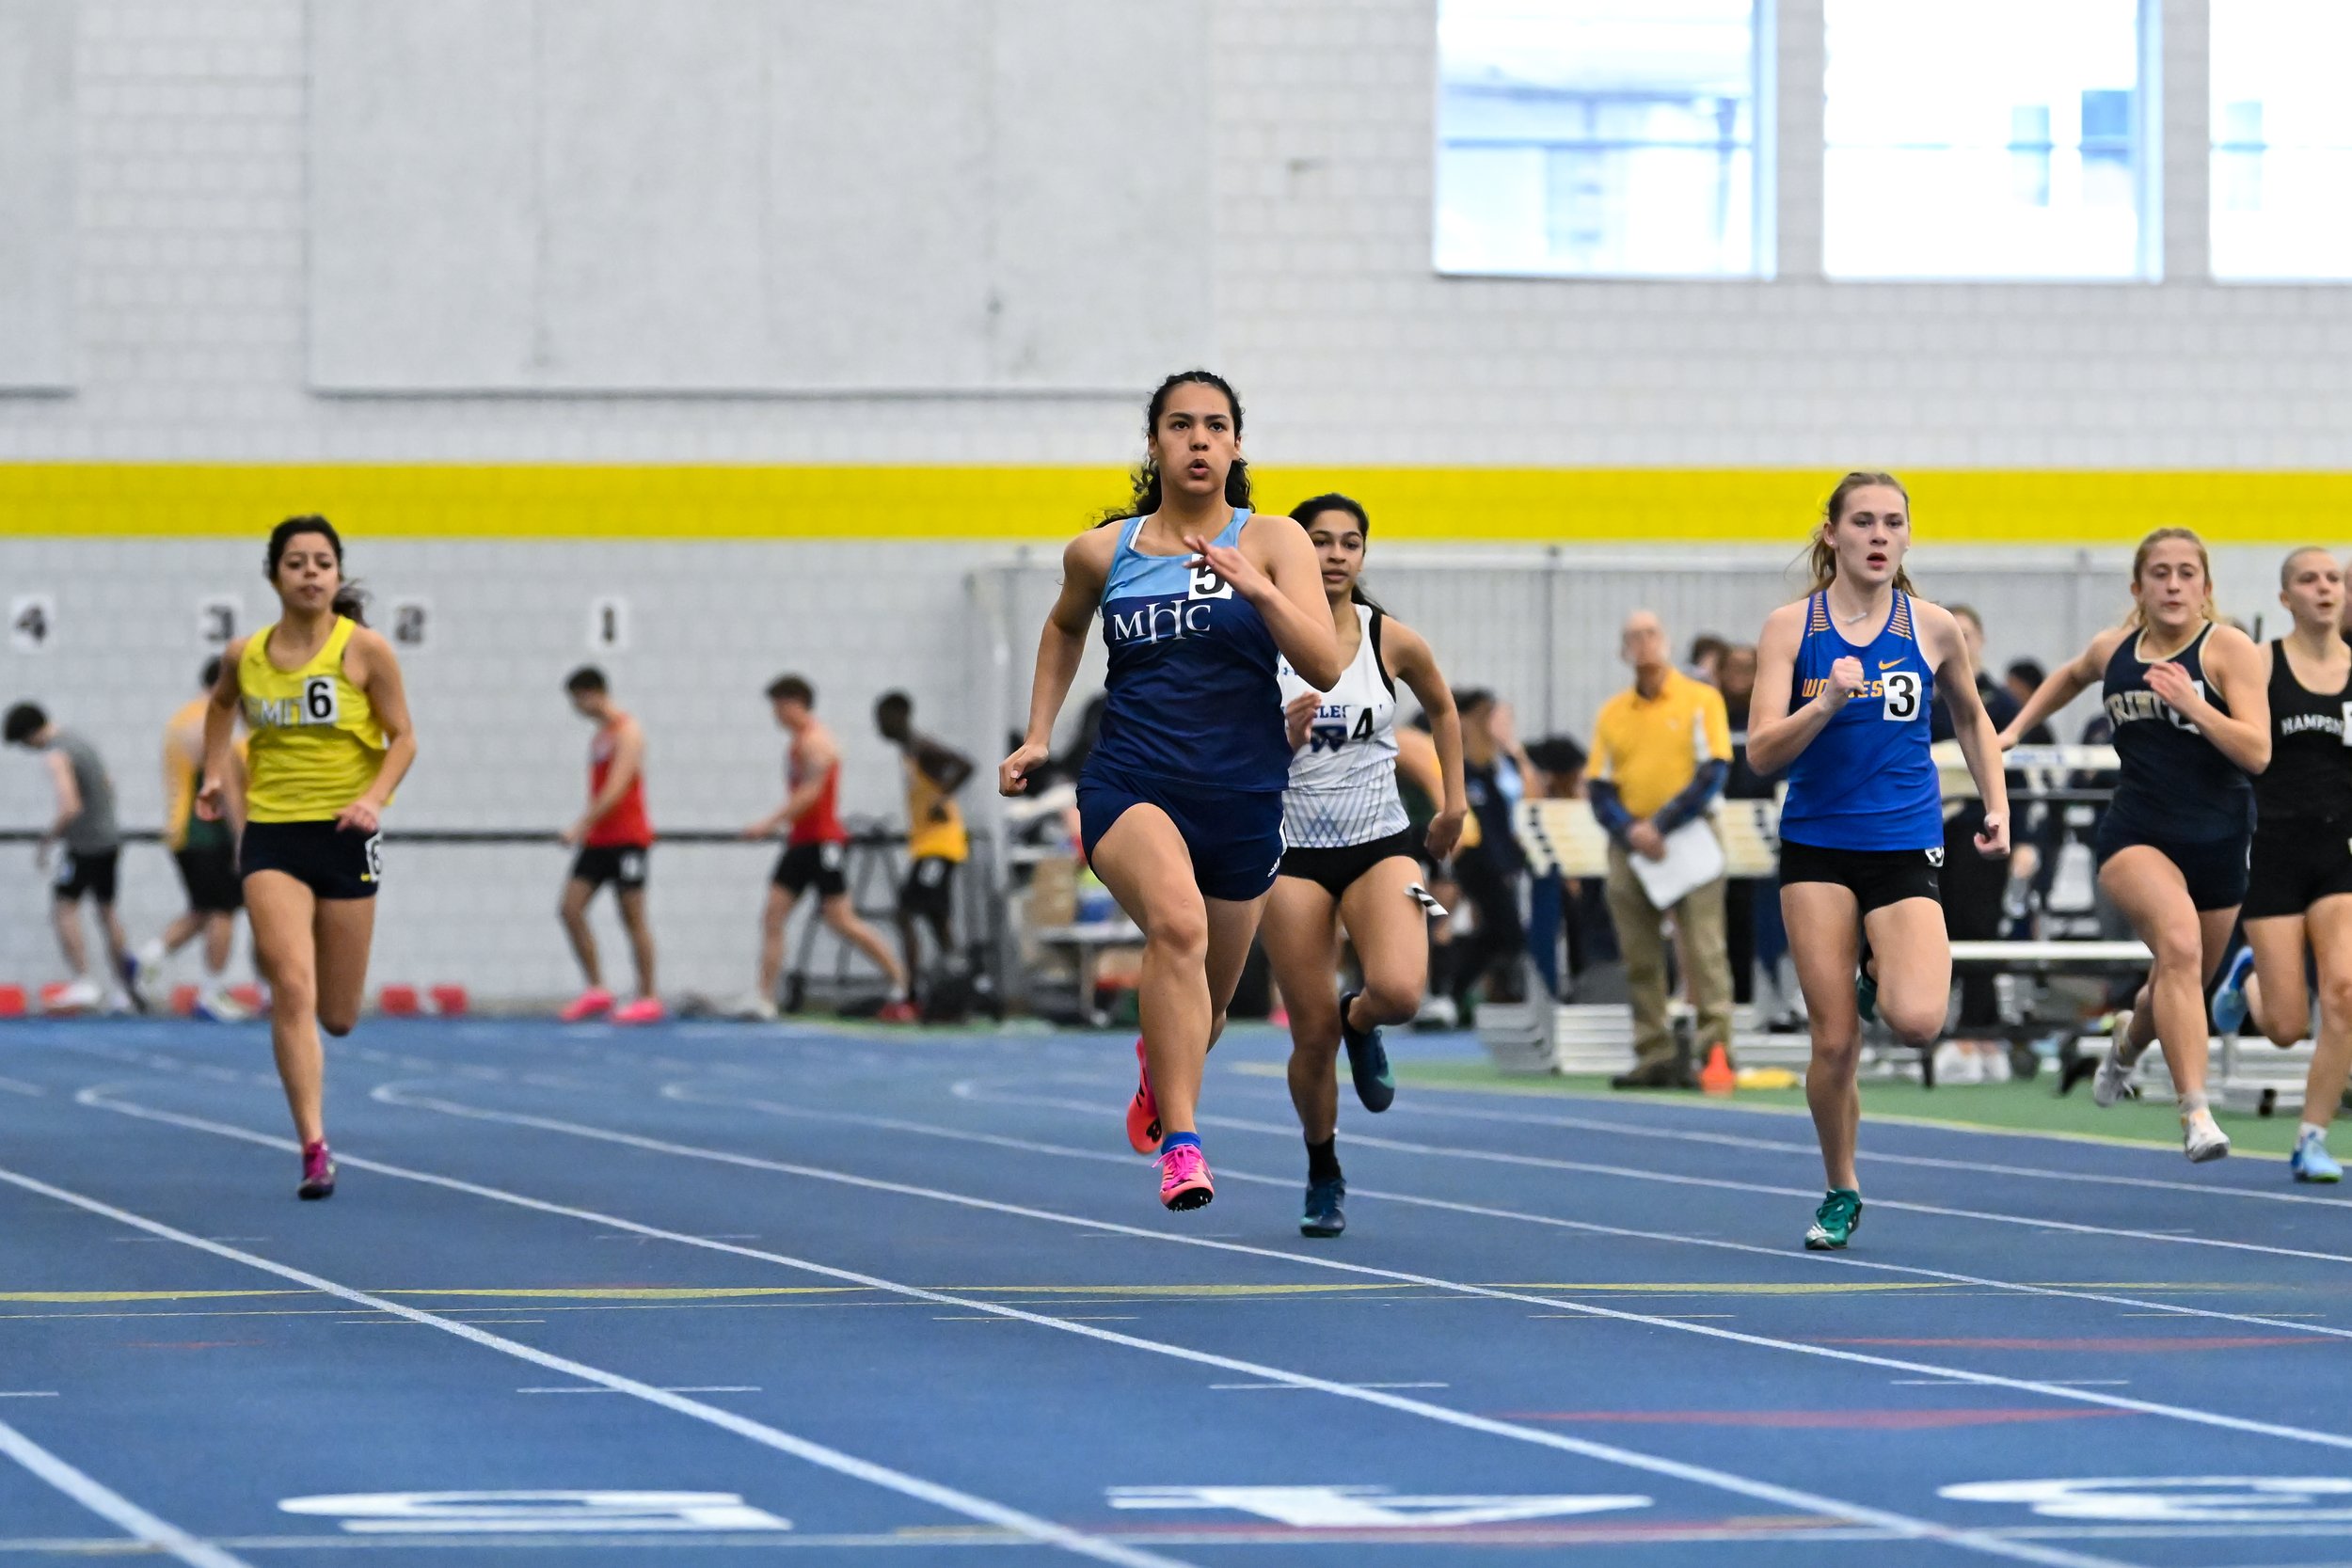 MHC Track & Field athletes break personal records at Amherst Spring Fling